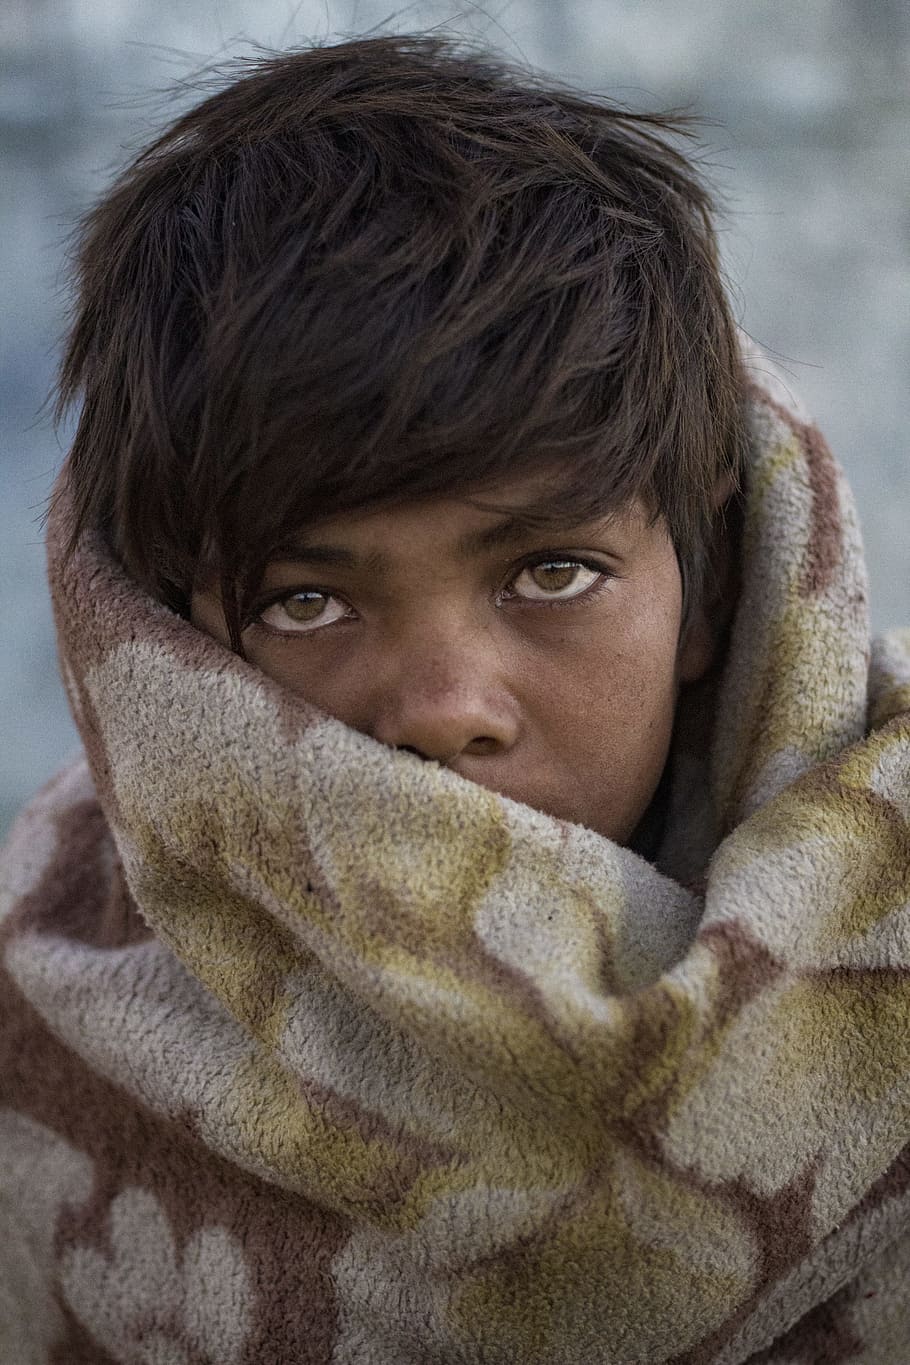 cold, person, eyes, face, blanket, blurred background, boy, child